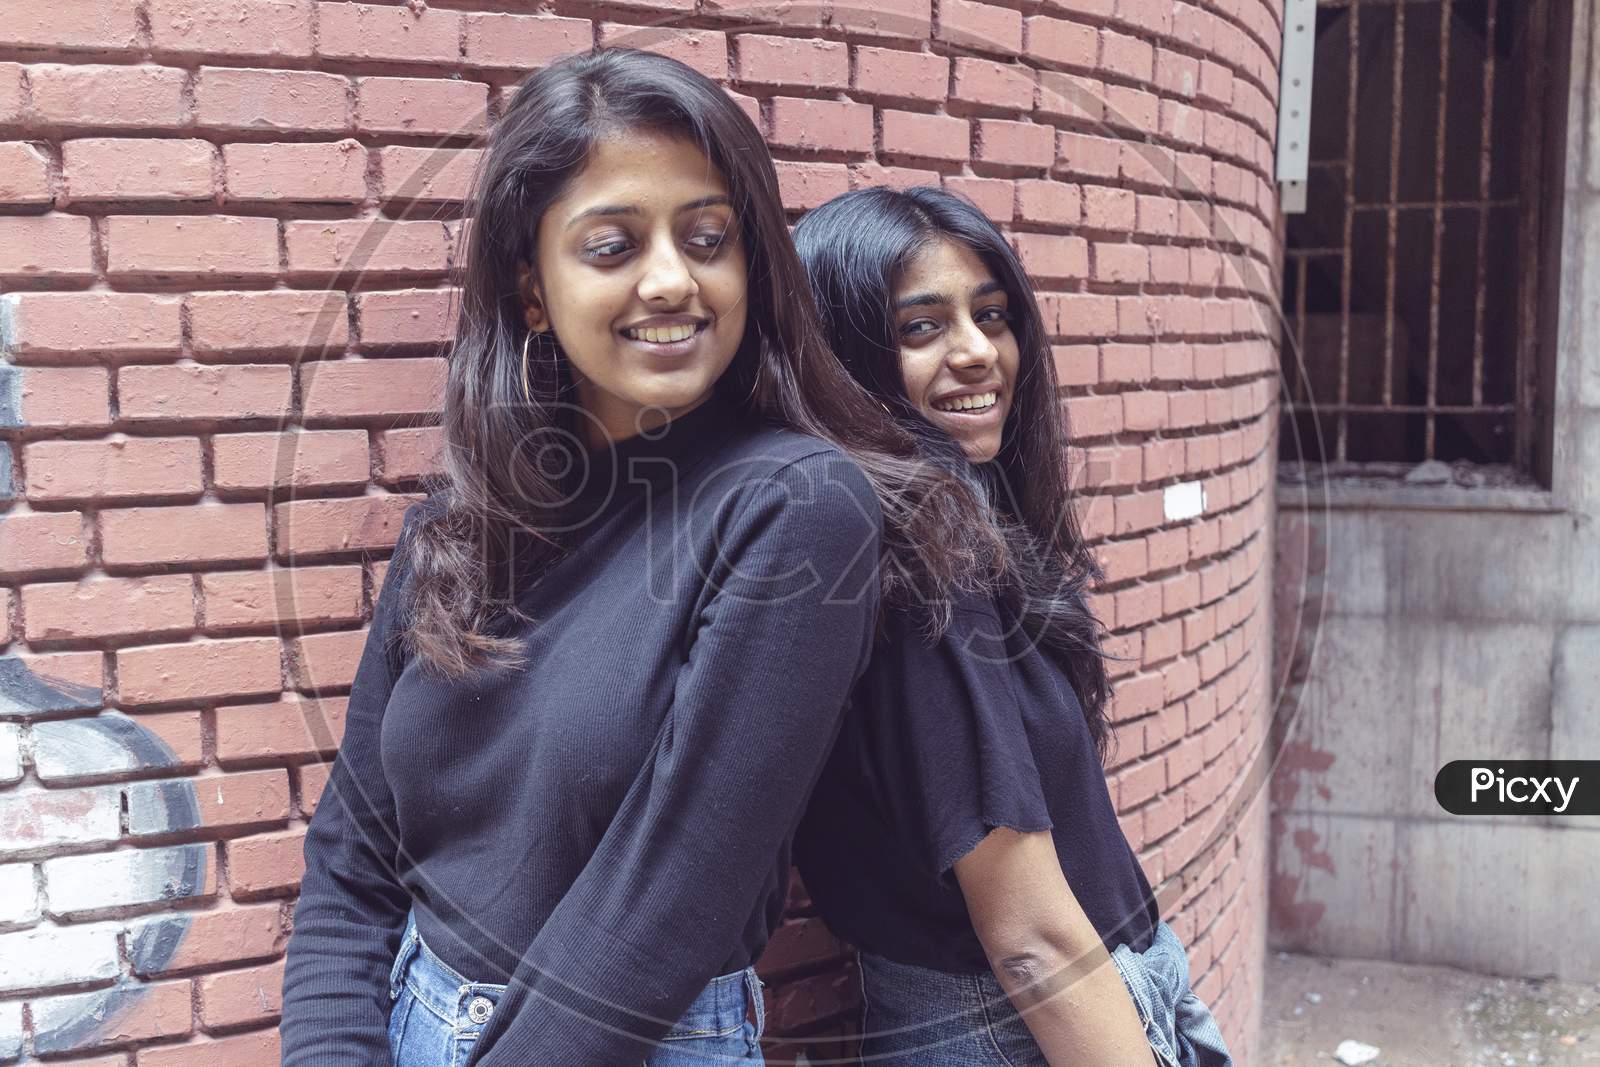 Friends Forever. Two Cute Lovely Girl Friends Posing With Smile